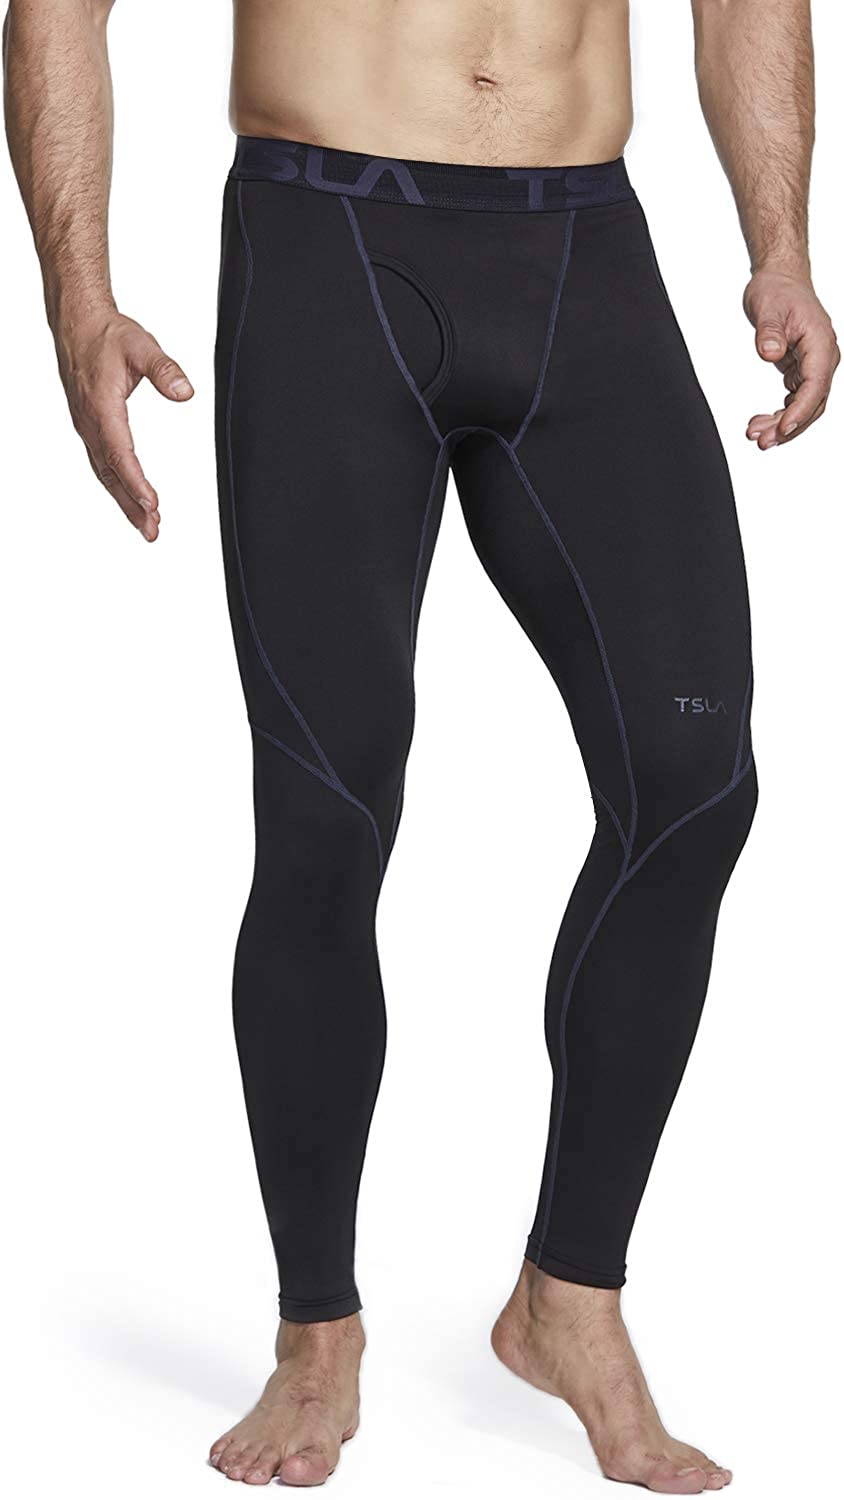 Athletic Sports Leggings & Running Tights Wintergear Base Layer Bottoms TSLA Mens Thermal Compression Pants